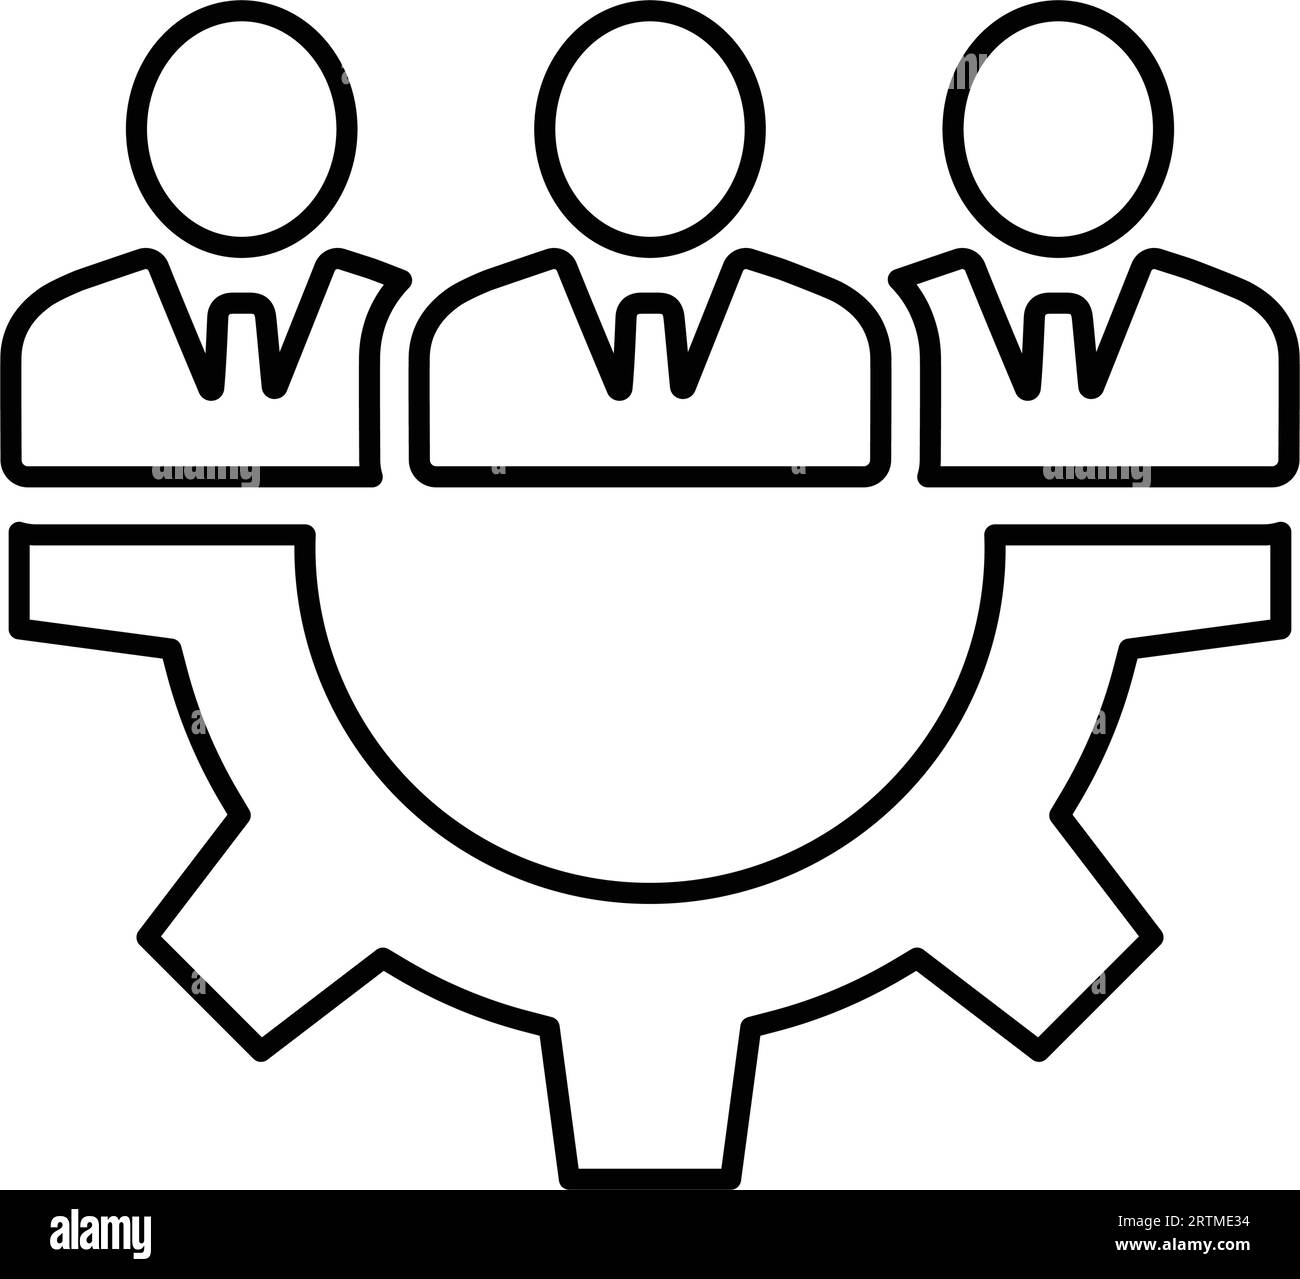 Business Support Team Icon. design for commercial use, web, print media or any type of design projects. Stock Vector